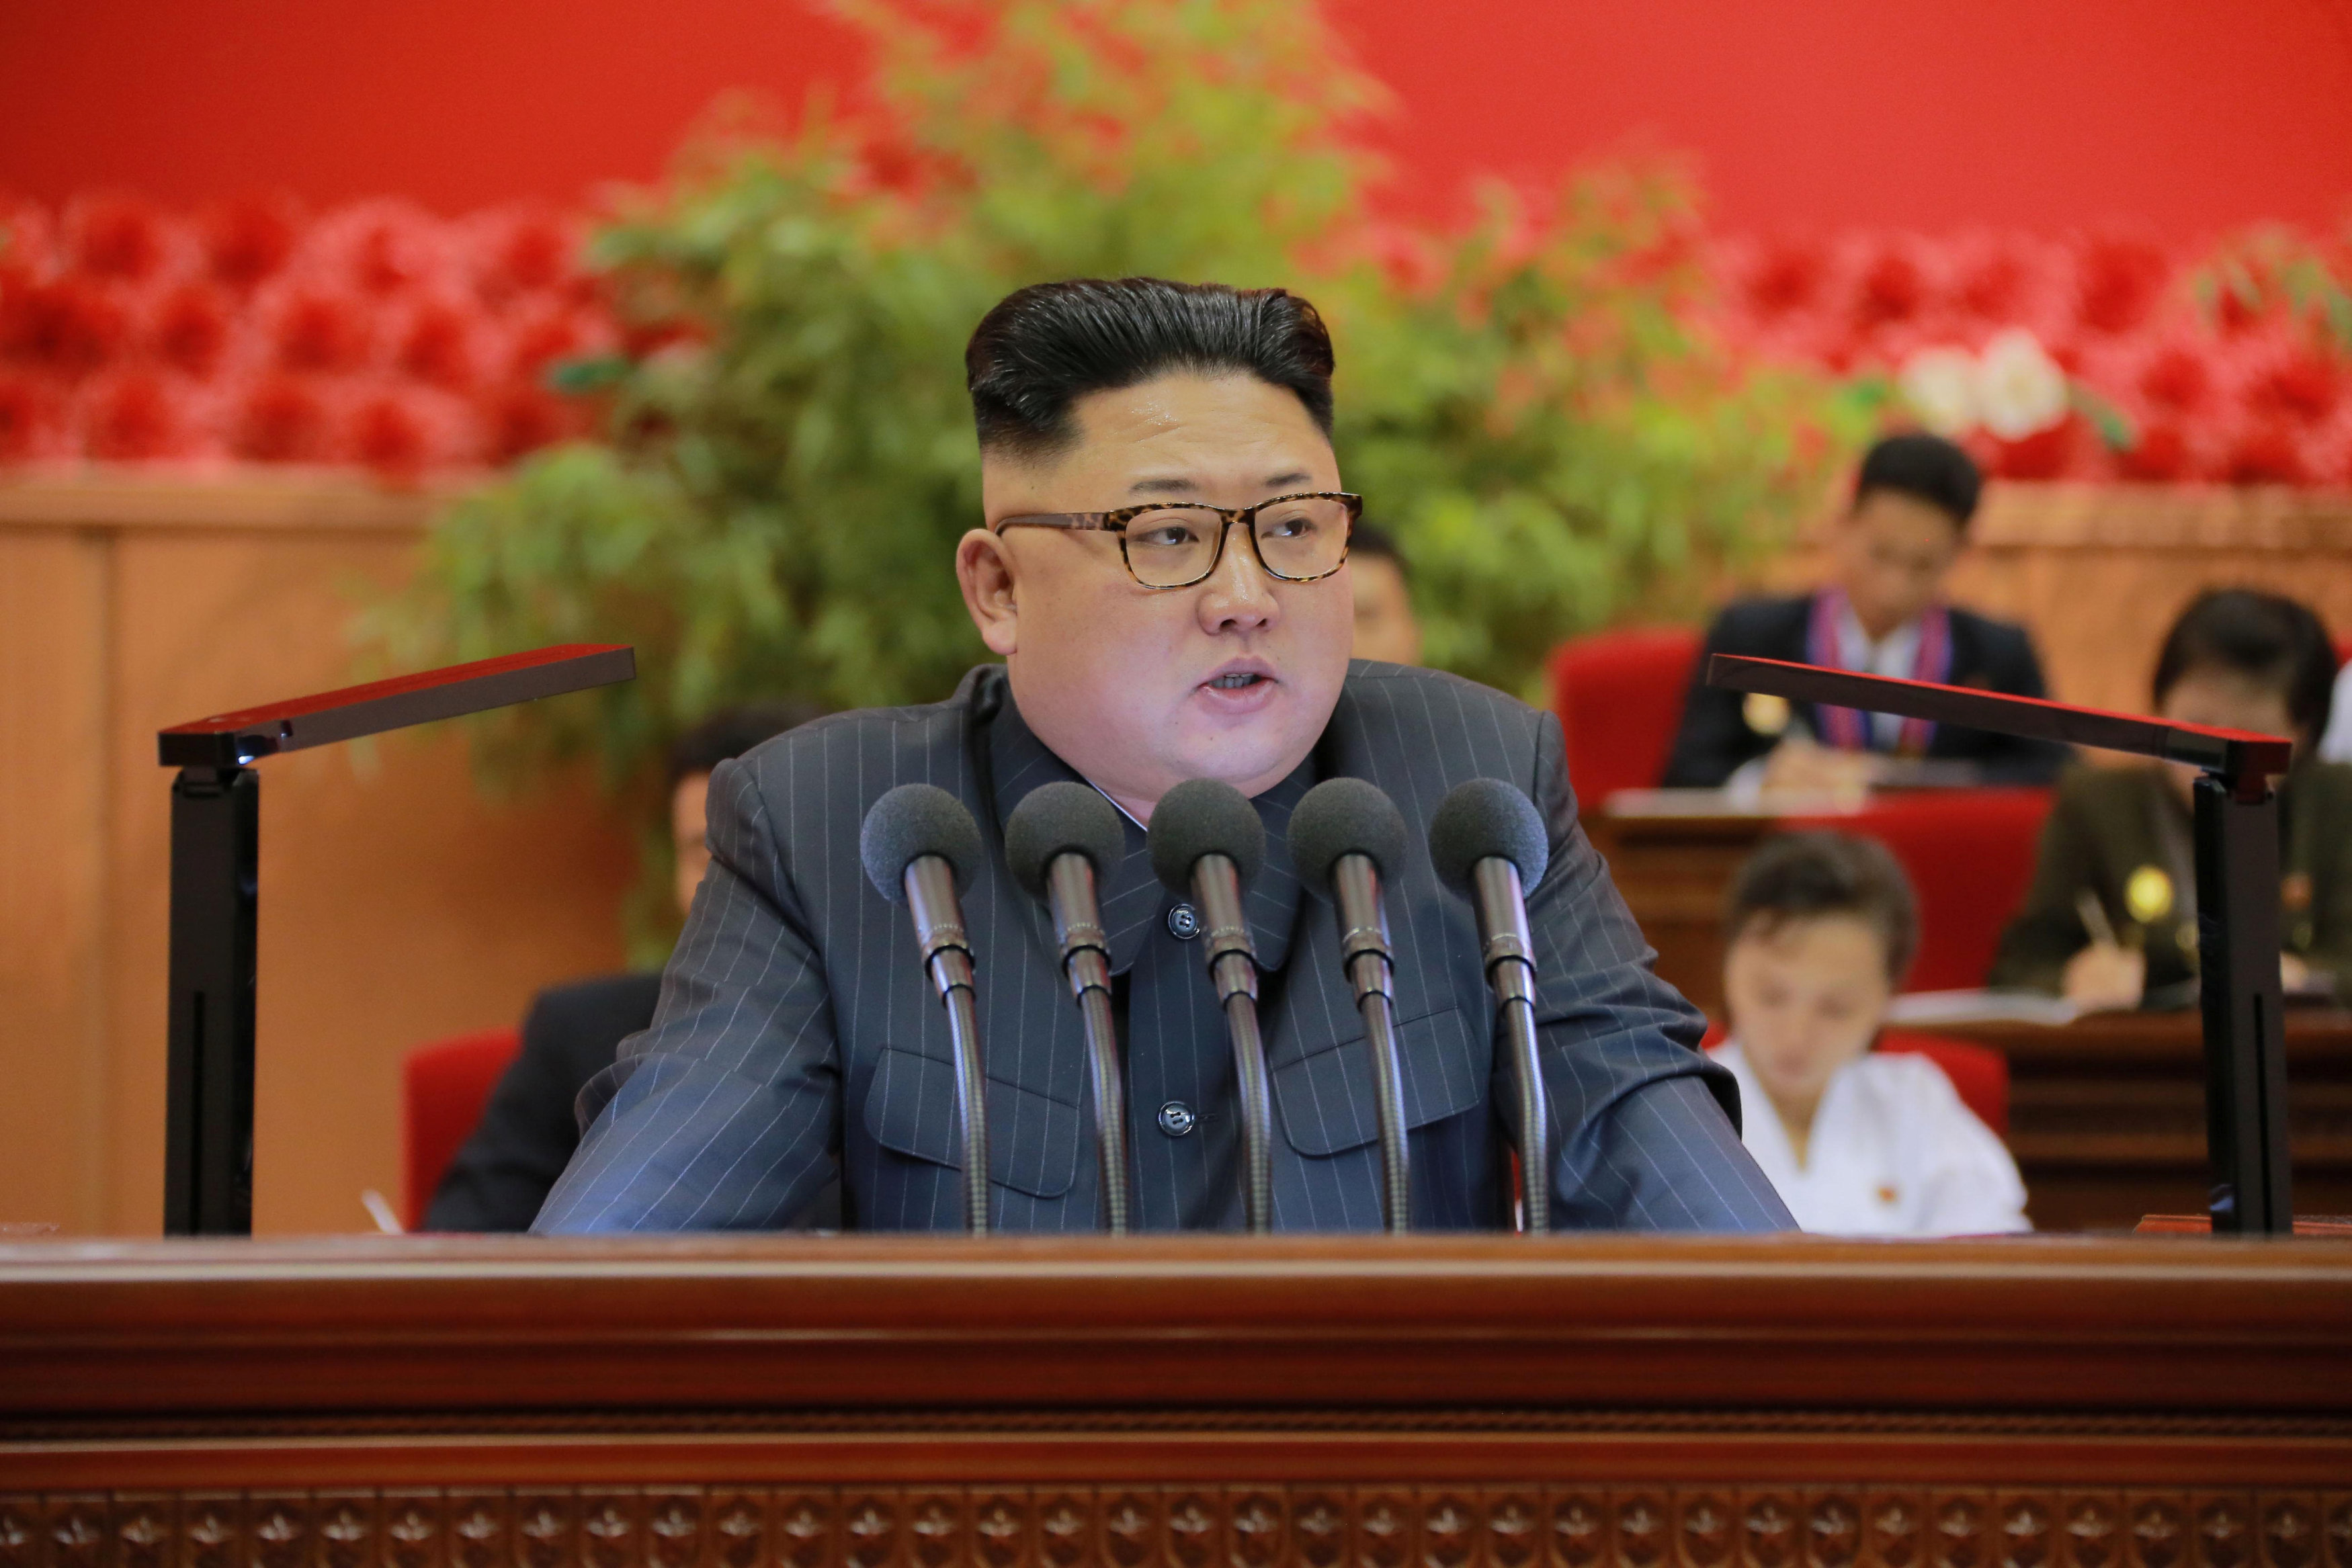 North Korean leader Kim Jong Un gives a speech at the 9th Congress of the Kim Il Sung Socialist Youth League in this undated photo released by North Korea's Korean Central News Agency (KCNA) in Pyongyang on August 29, 2016. KCNA/ via REUTERS ATTENTION EDI